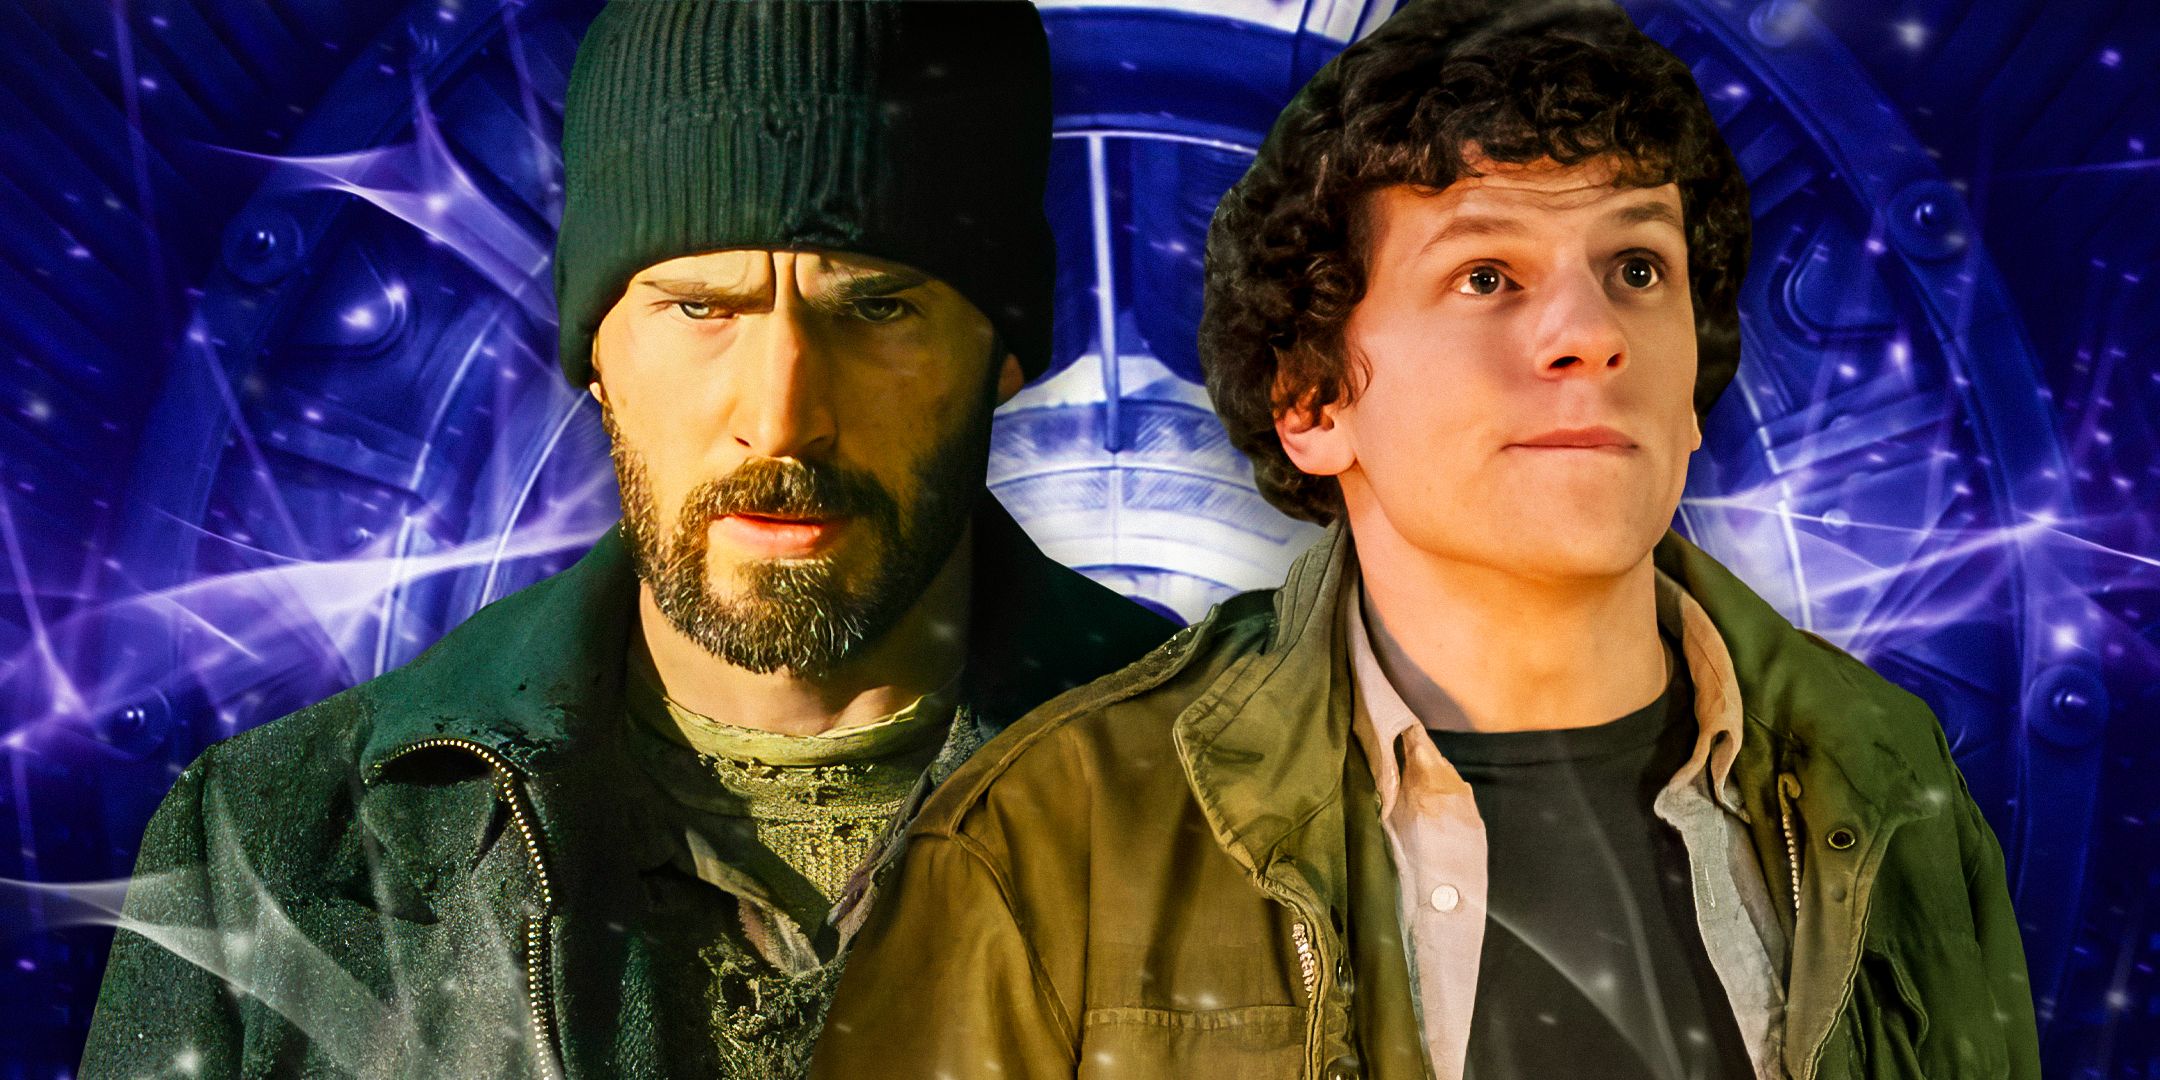 Jesse-Eisenberg-as-Columbus-from-Zombieland´and-(Chris-Evans-as-Curtis)-from-Snowpiercer